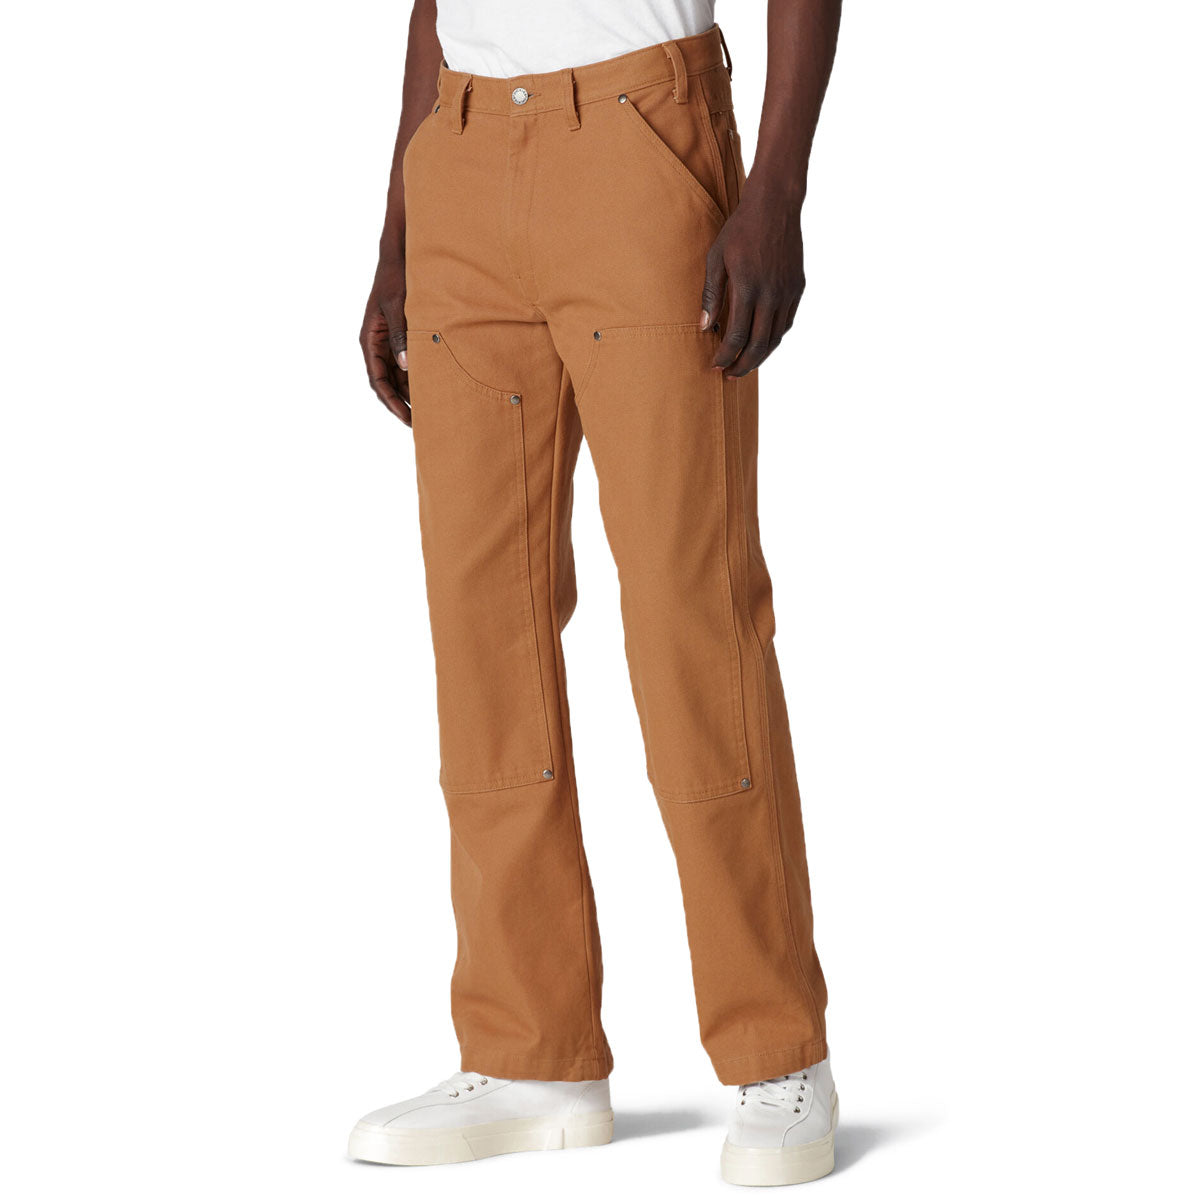 Dickies Double Front Duck Pants - Stonewashed Brown Duck image 1